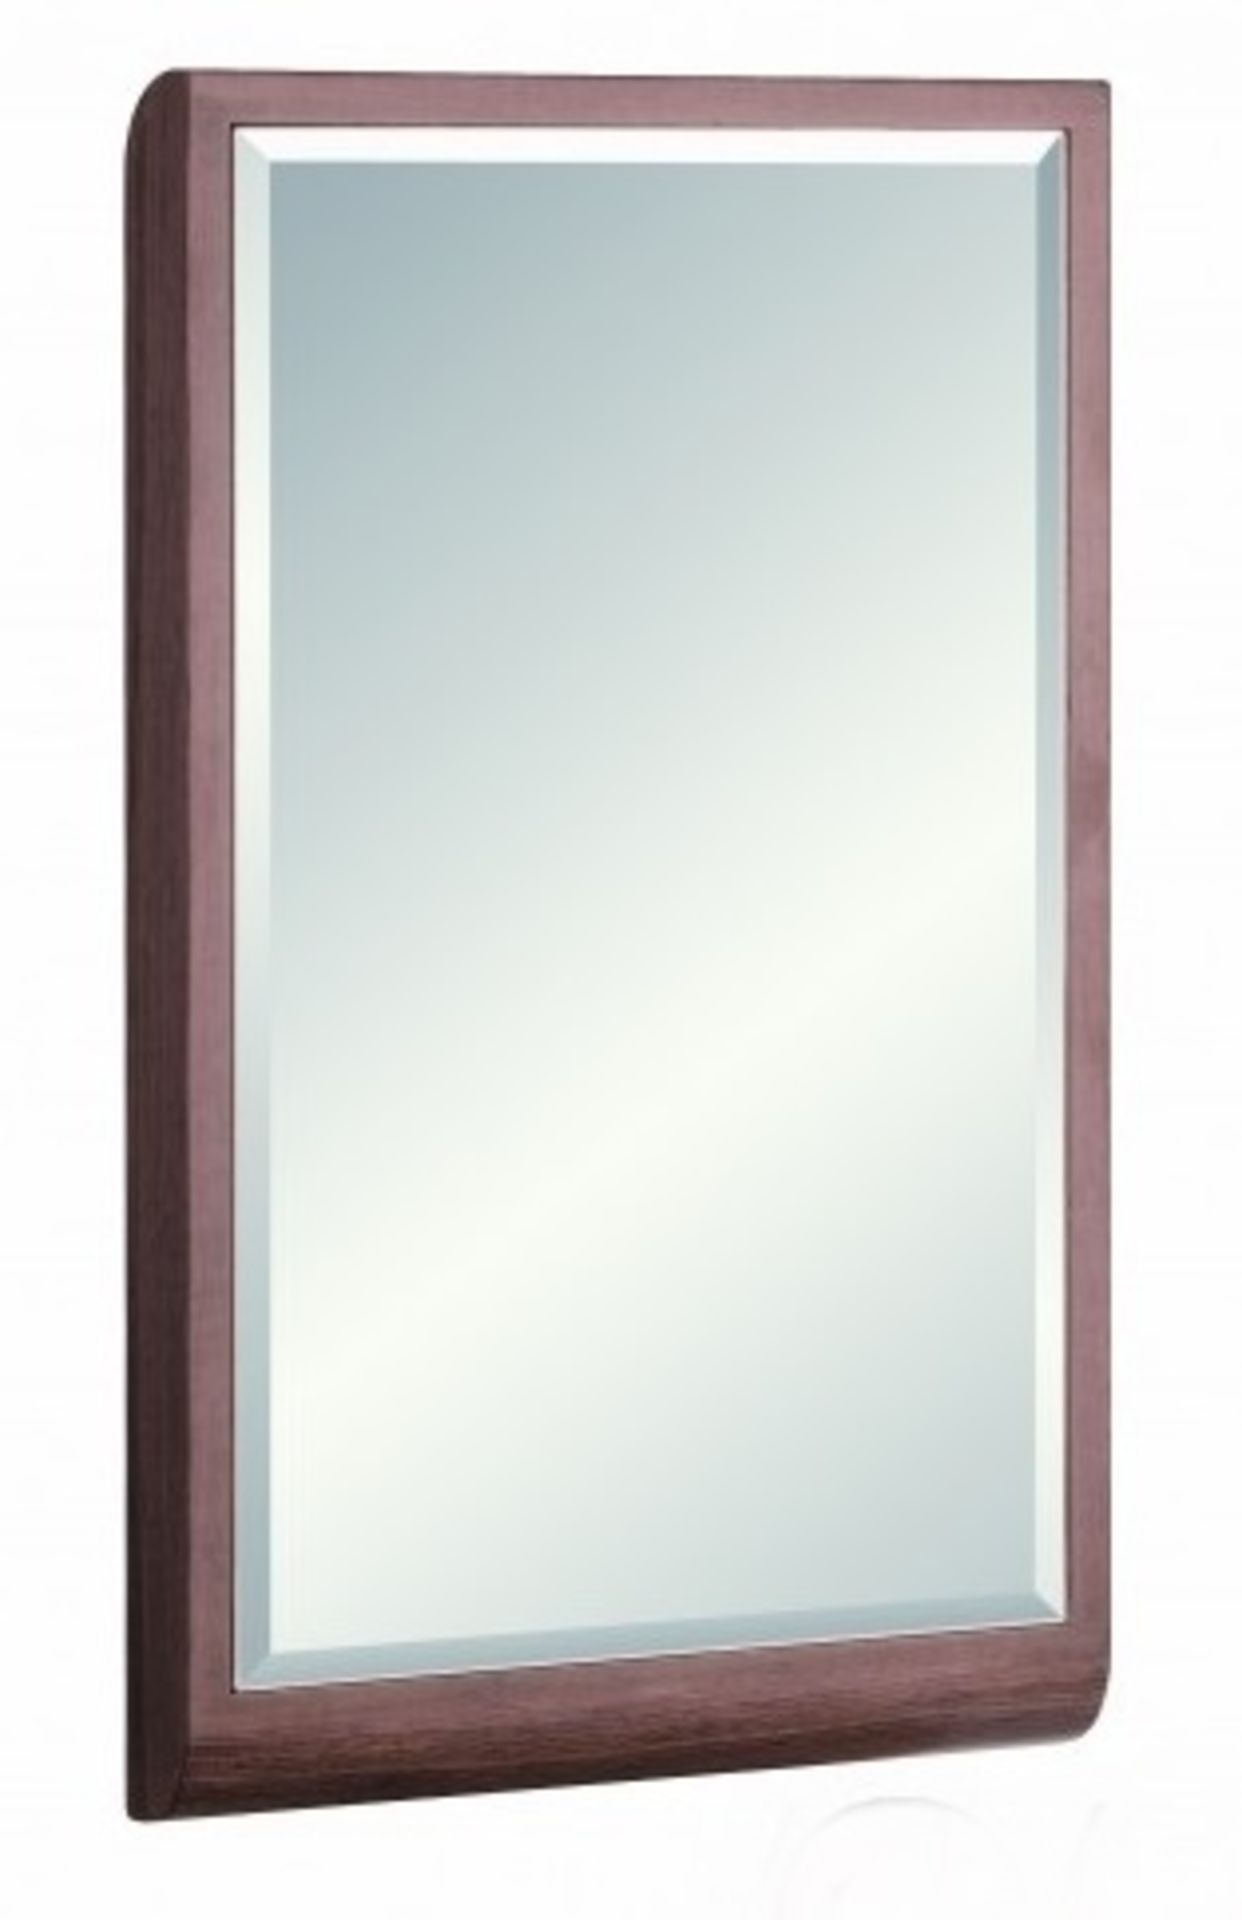 1 x Vogue ARC Bathroom Wall Mirror - WALNUT FINISH - Series 1 600x350mm - Manufactured to the - Image 2 of 2